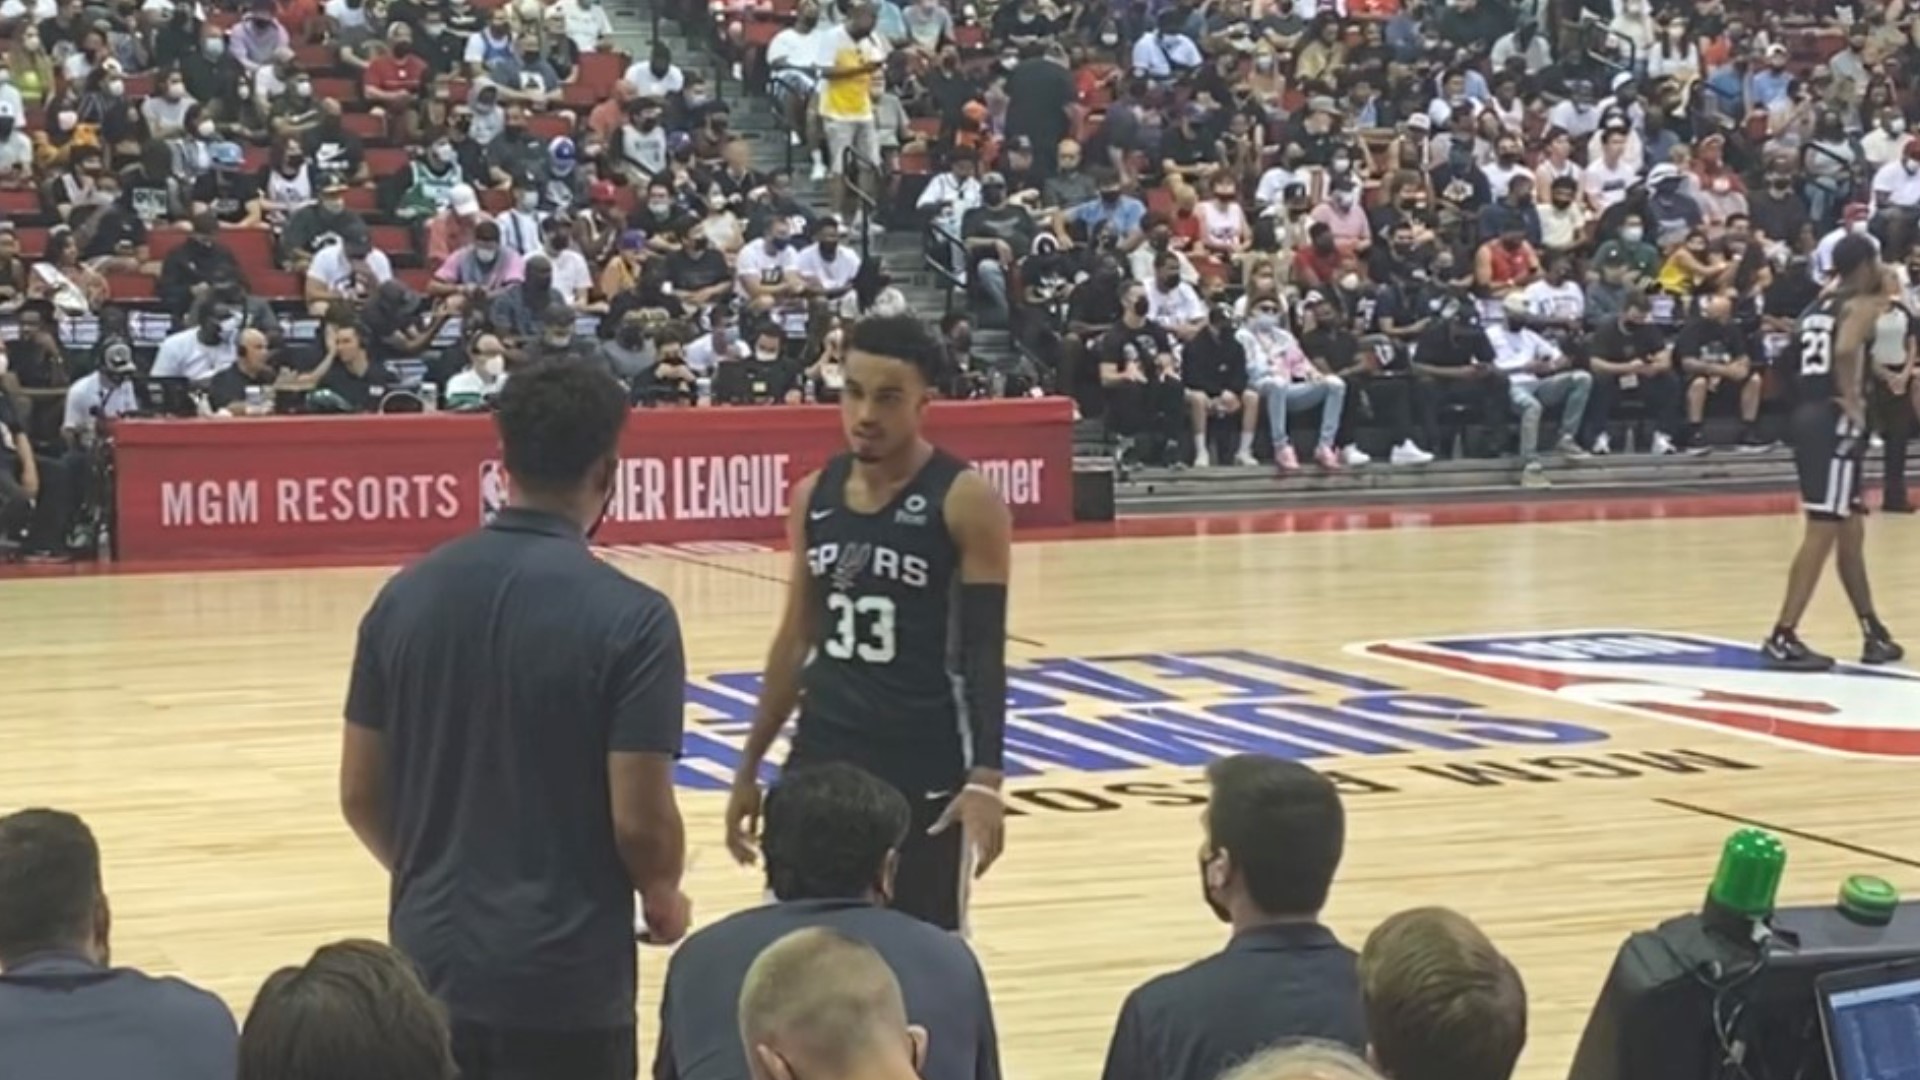 Tre Jones finished with 34 points, 9 assists and 8 boards in the best Summer League game for any Spur this year.